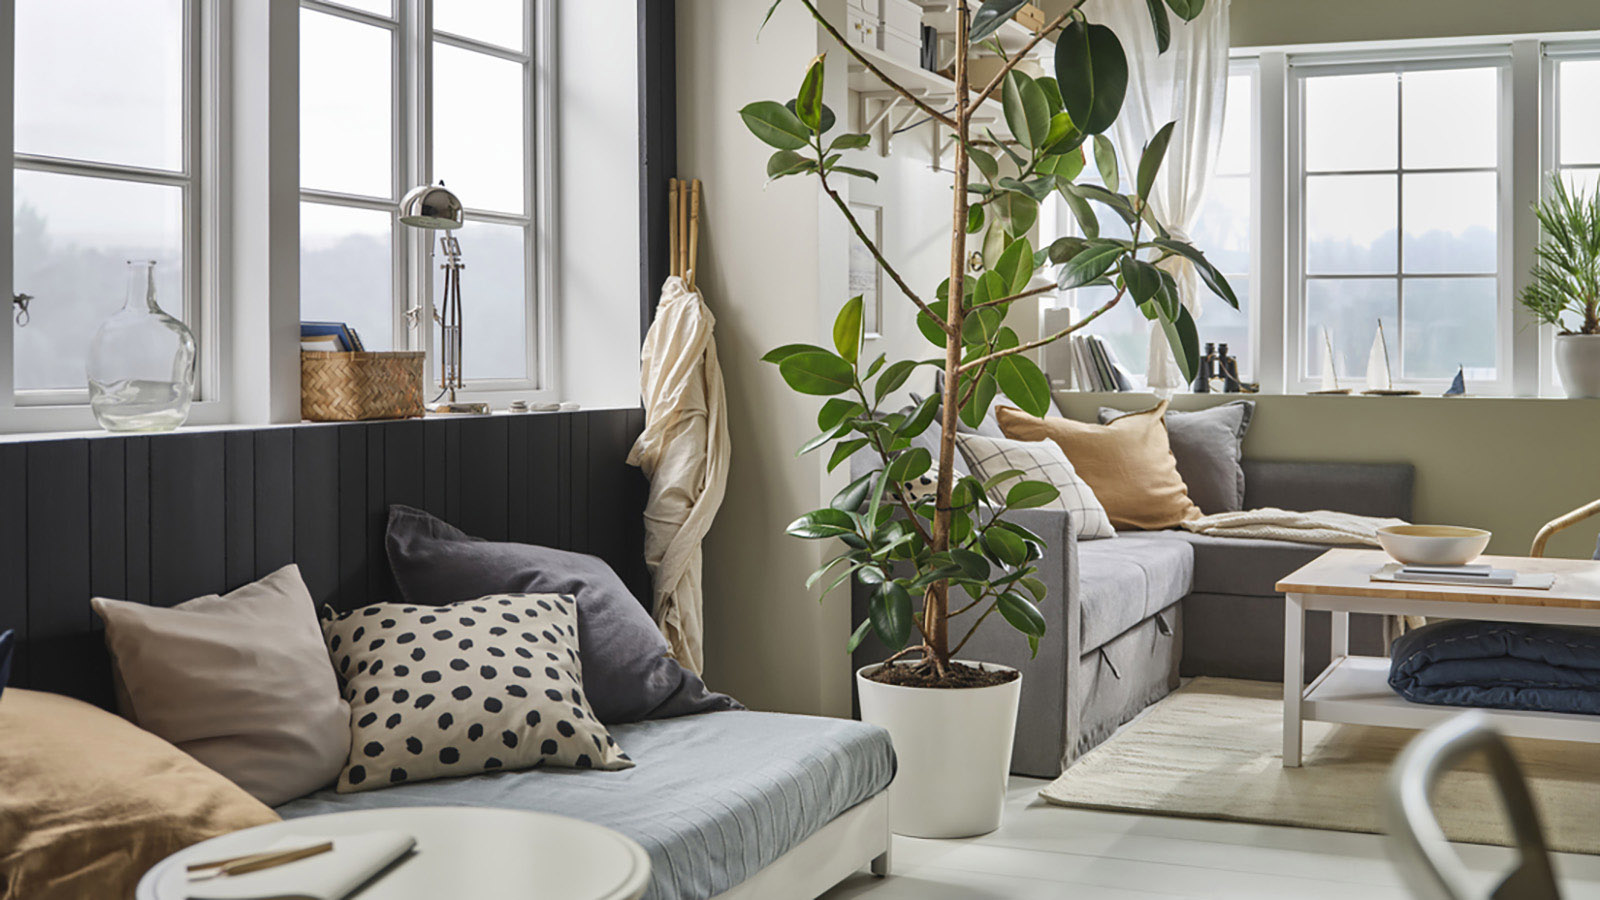 IKEA - Different ways to decorate with large plant pots for an oasis of calm